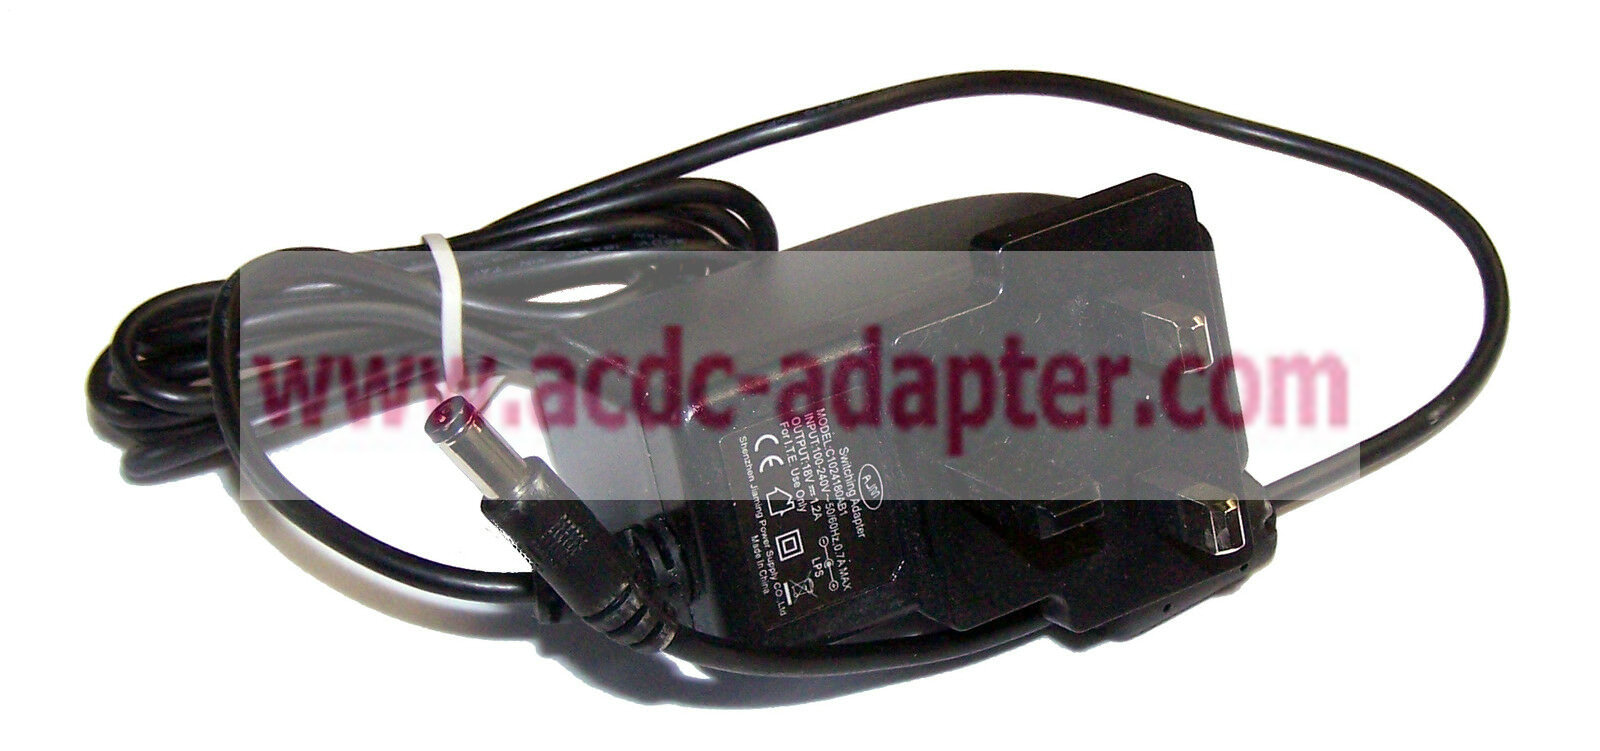 NEW AJM C1024180AB1 18VDC 1.2A AC Adapter power charger UK PLUG